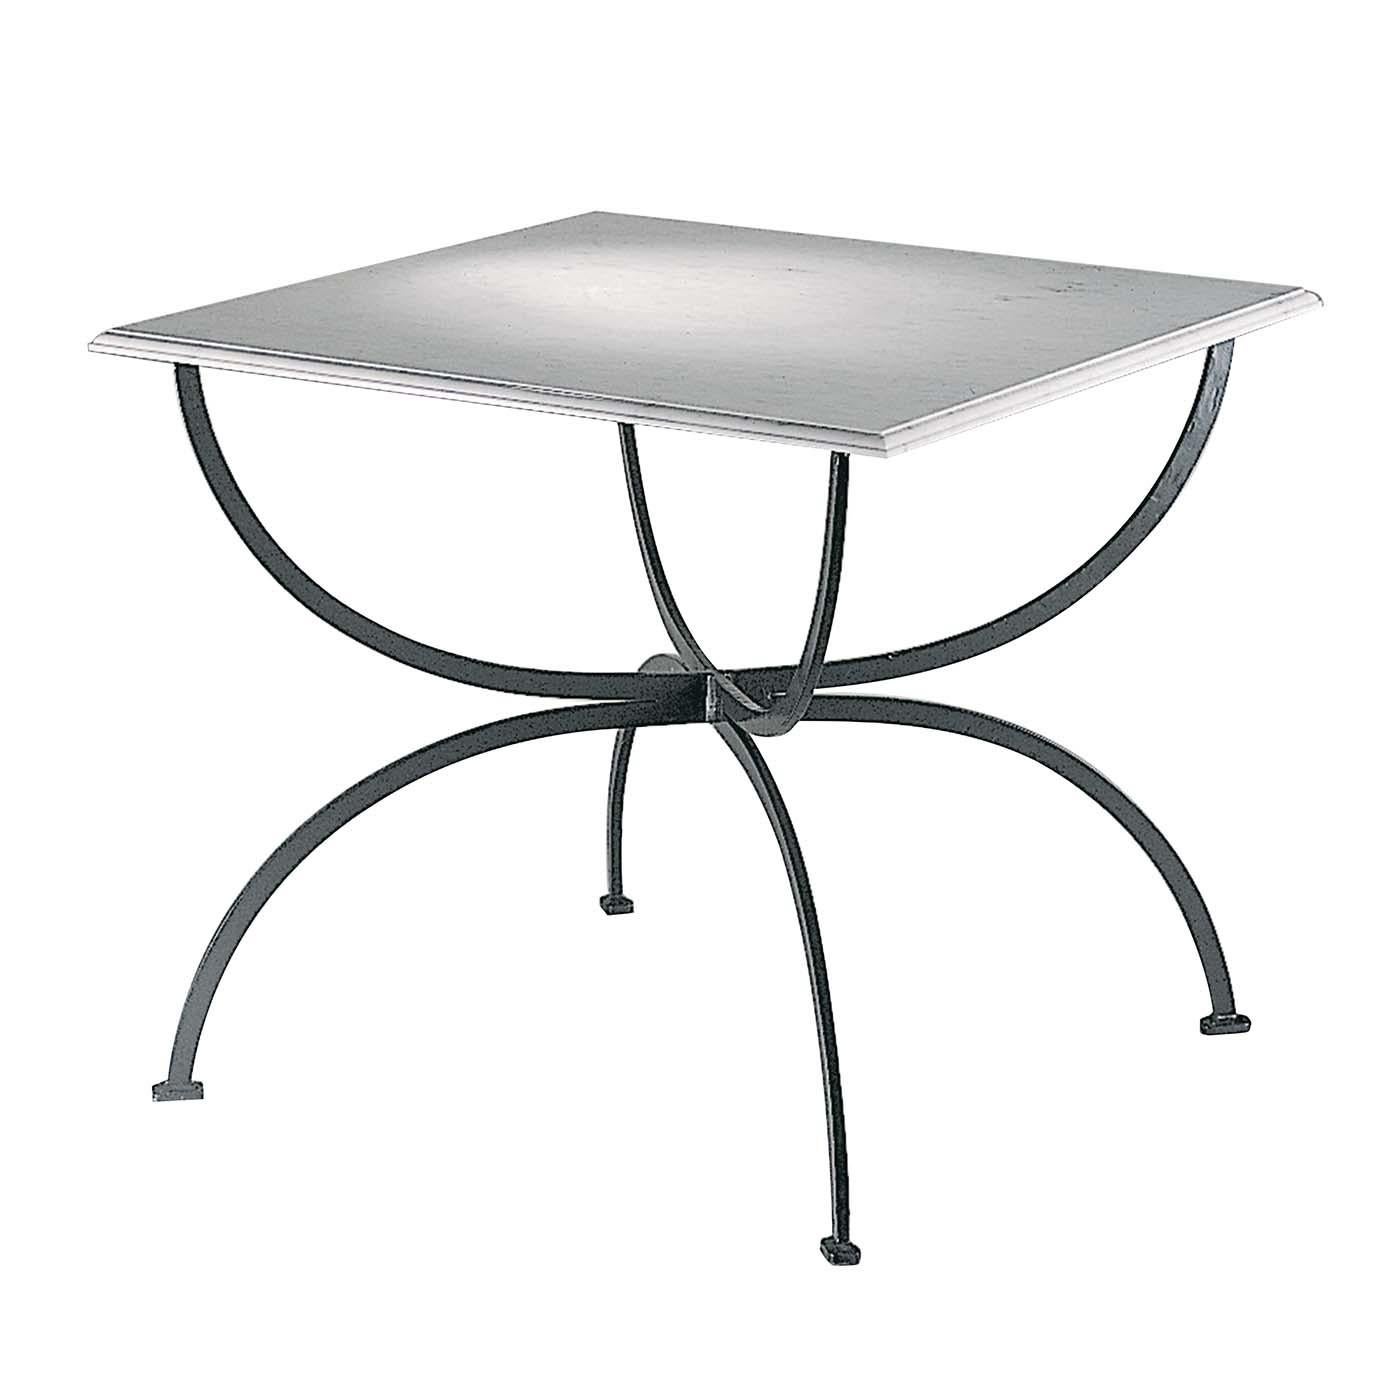 Piazza Outdoor Table For Sale